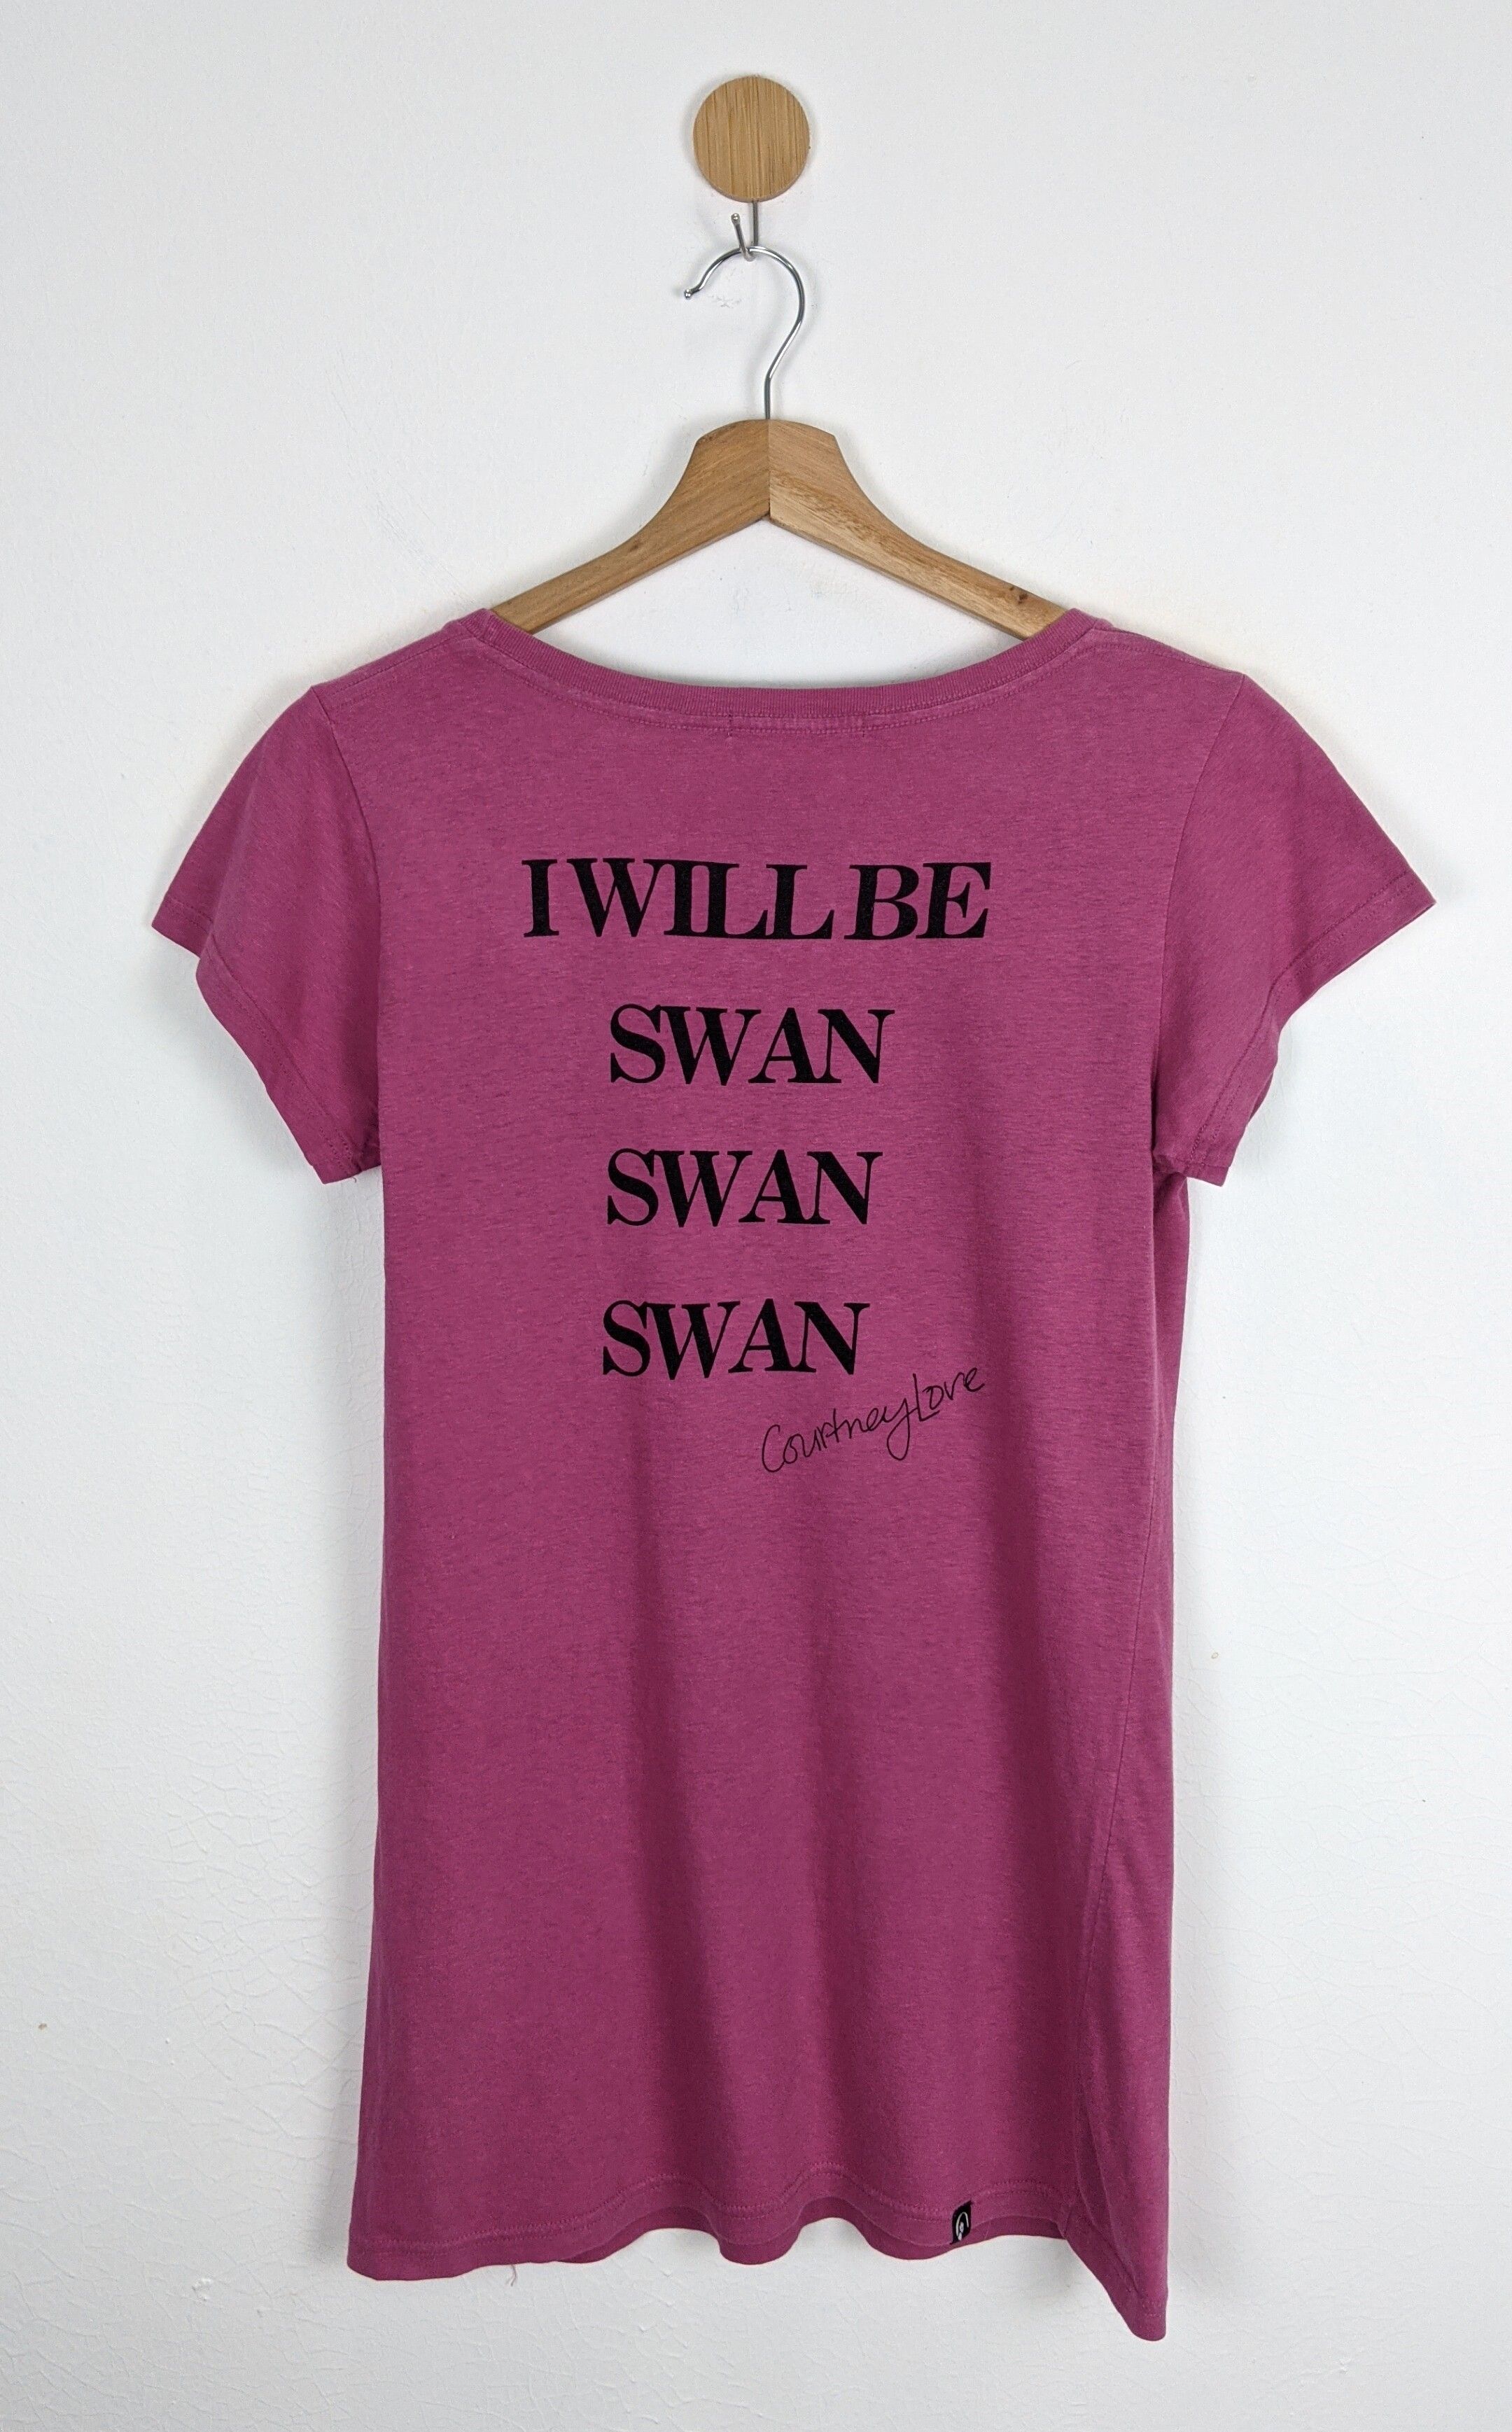 Hysteric Glamour x Courtney Love Hole I Will be Swan shirt - 2